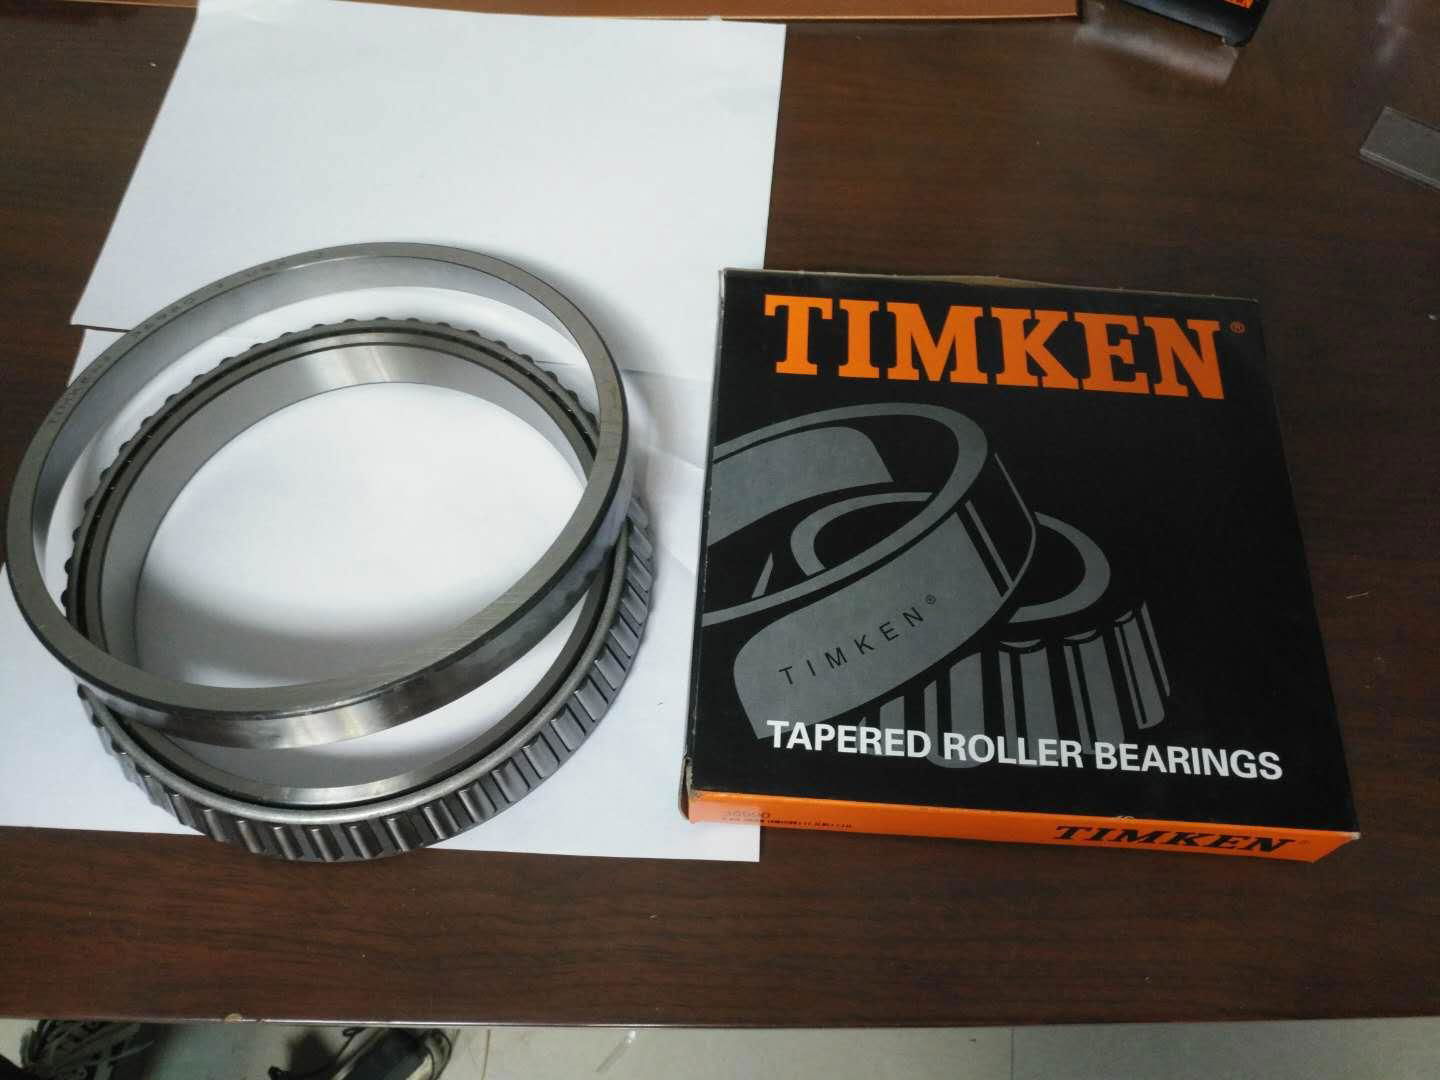 TIMKEN Tapered roller bearings M12649 M12610 have in stock